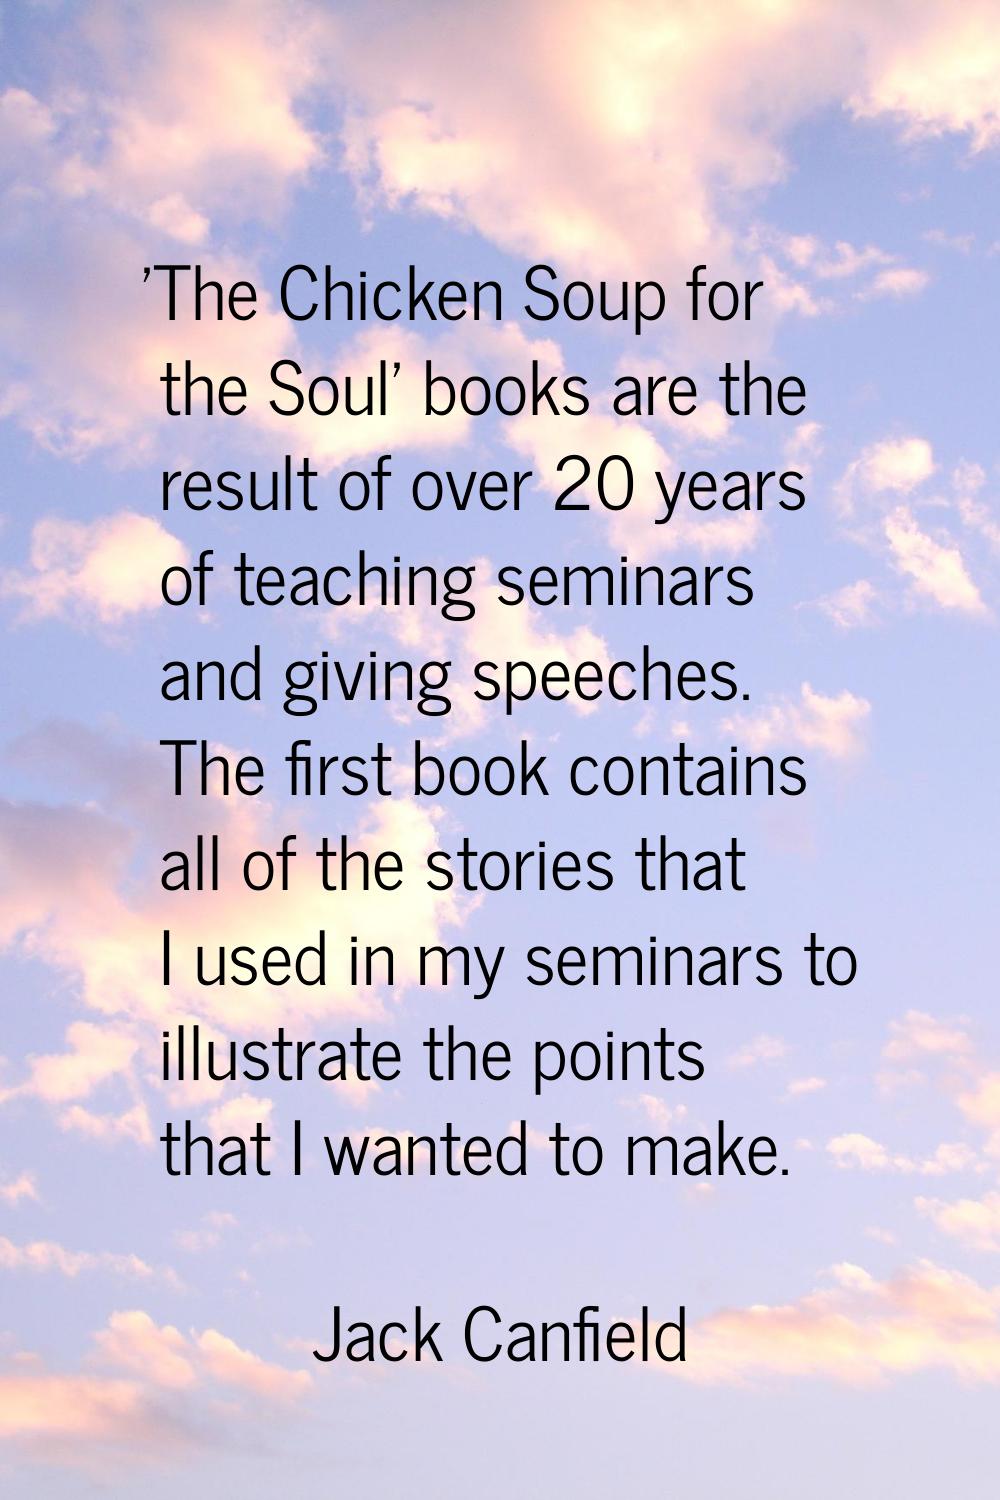 'The Chicken Soup for the Soul' books are the result of over 20 years of teaching seminars and givi